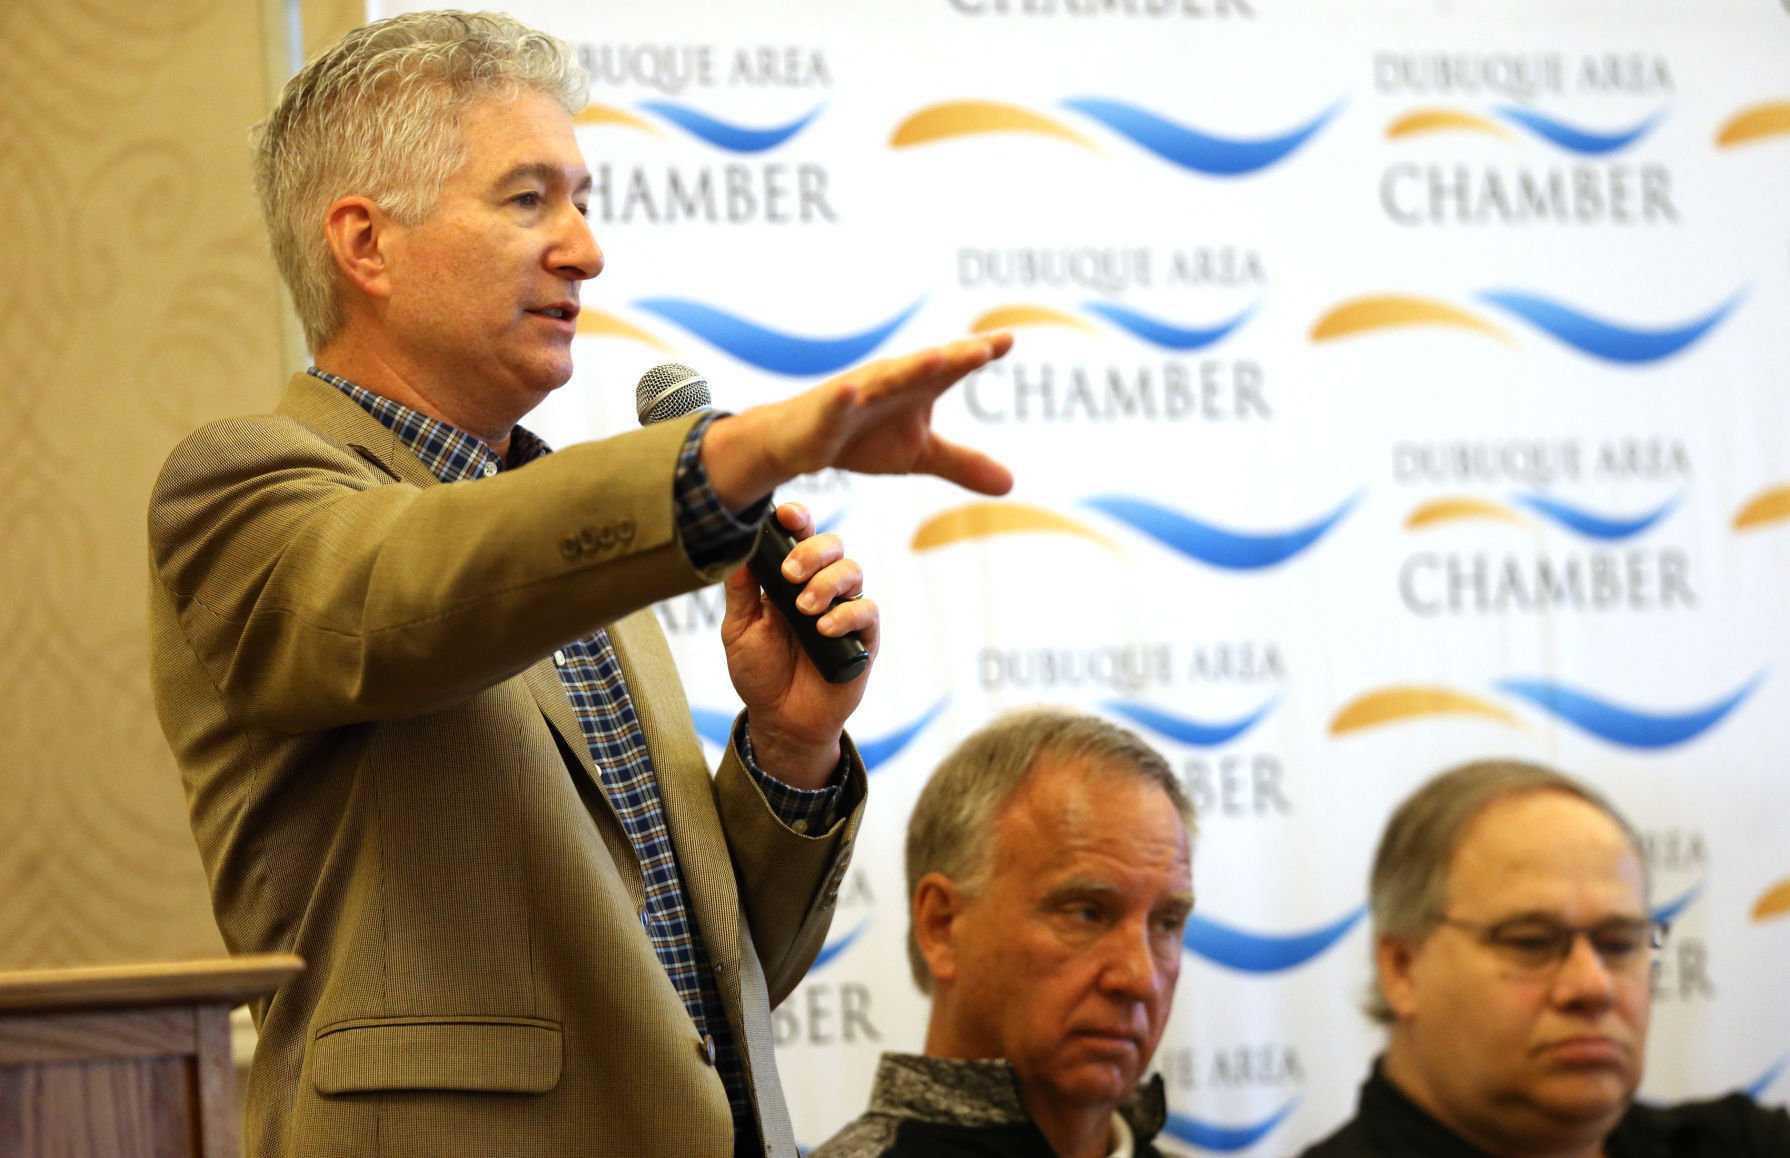 Dubuque Mayor Pro Tem David Resnick speaks during the Dubuque Area Chamber of Commerce